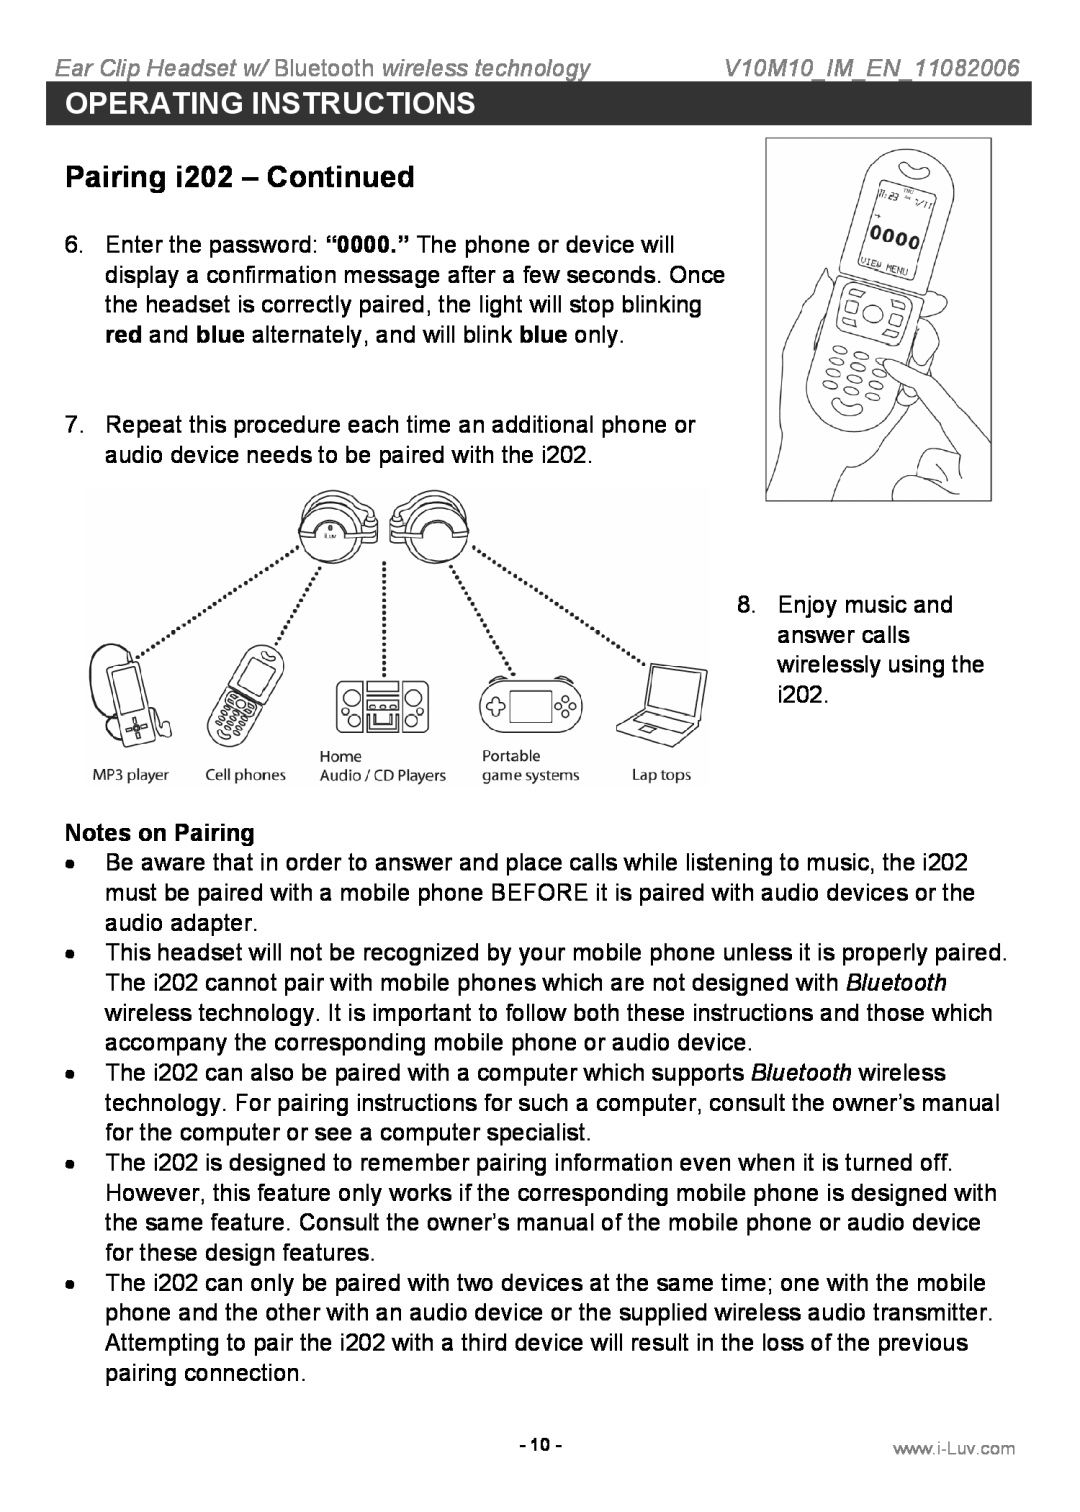 Iluv Pairing i202 - Continued, Operating Instructions, Ear Clip Headset w/ Bluetooth wireless technology 